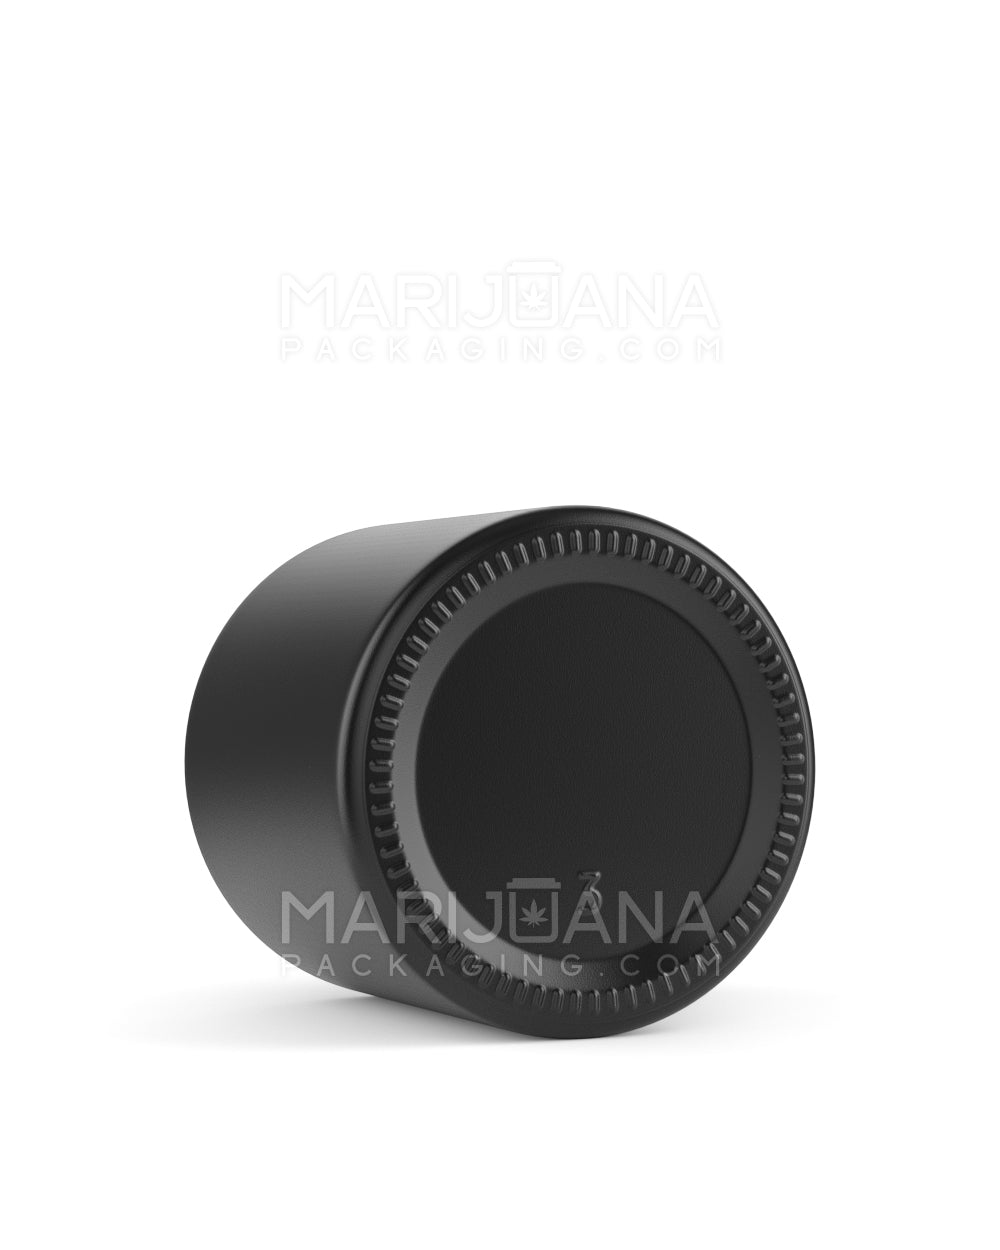 Straight Sided Matte Black Glass Jars | 50mm - 3oz - 100 Count - 4